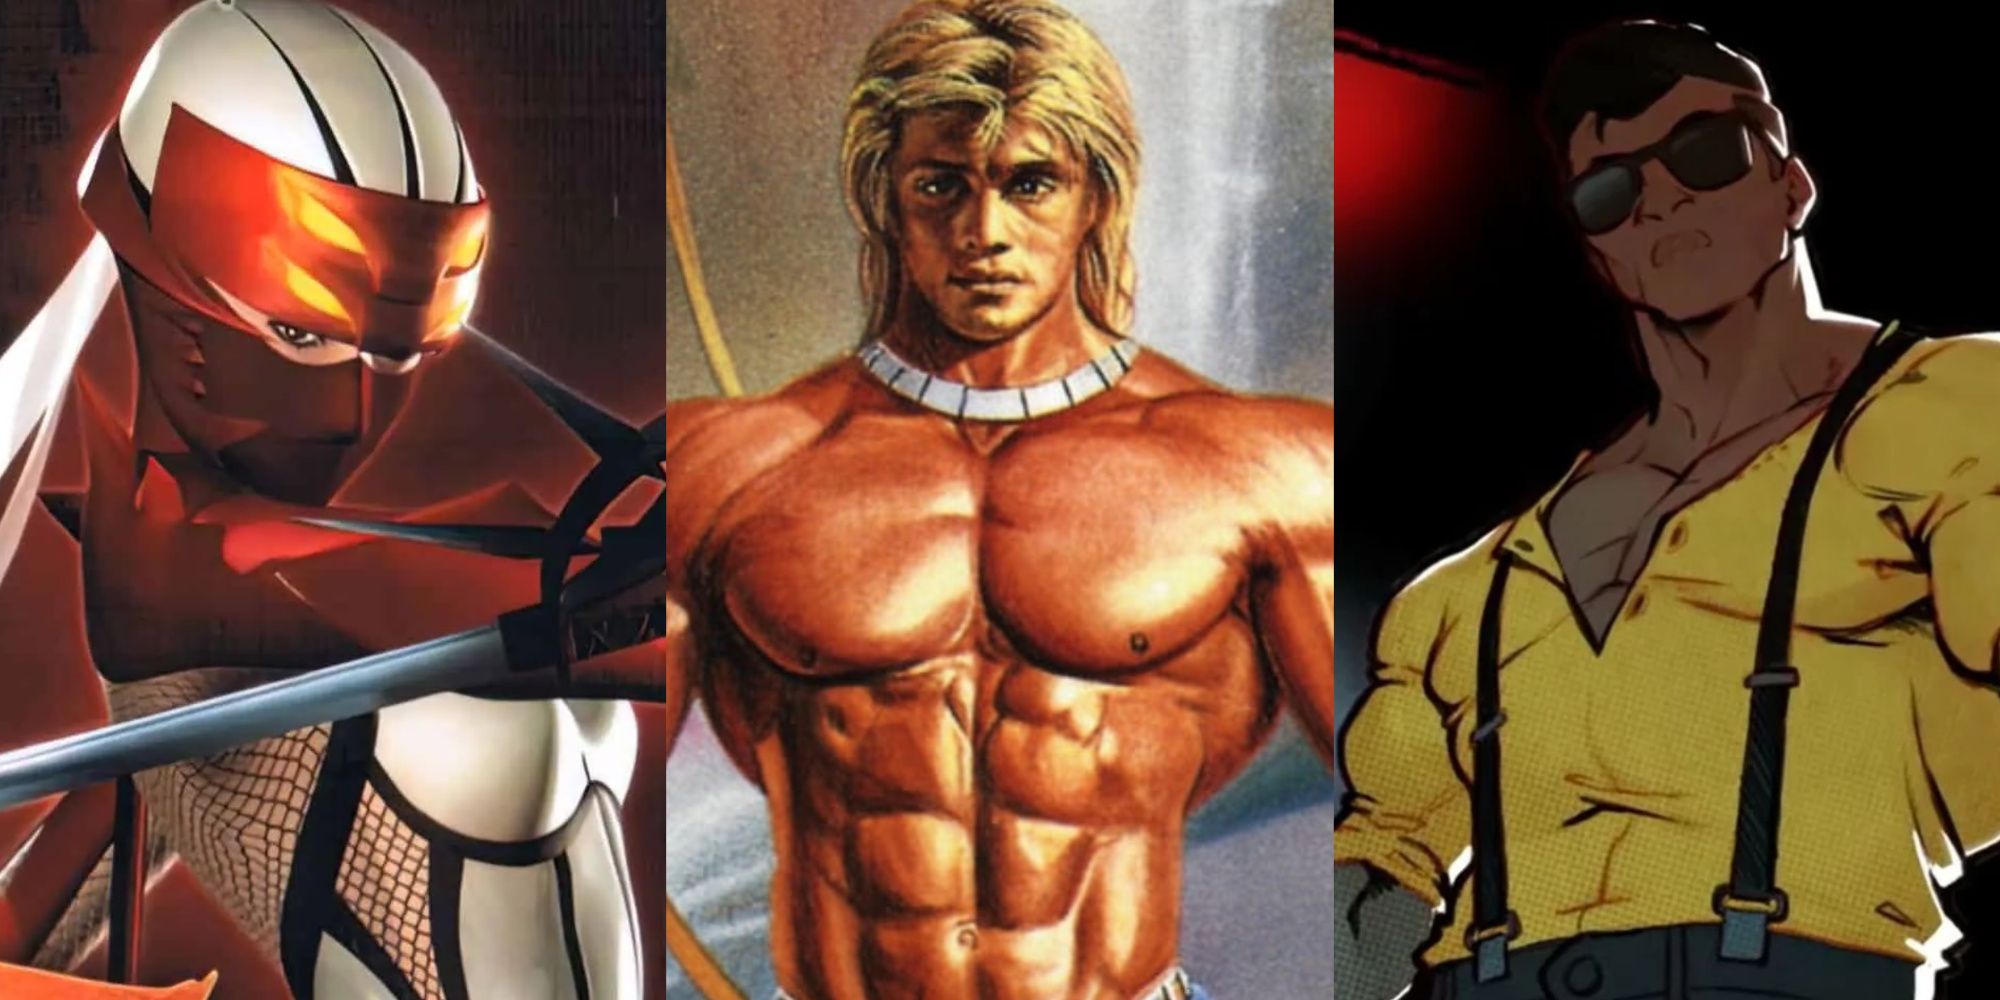 A split image of Hibana from Nightshade, Ax Battler from Golden Axe, and Adam hunter from Streets Of Rage